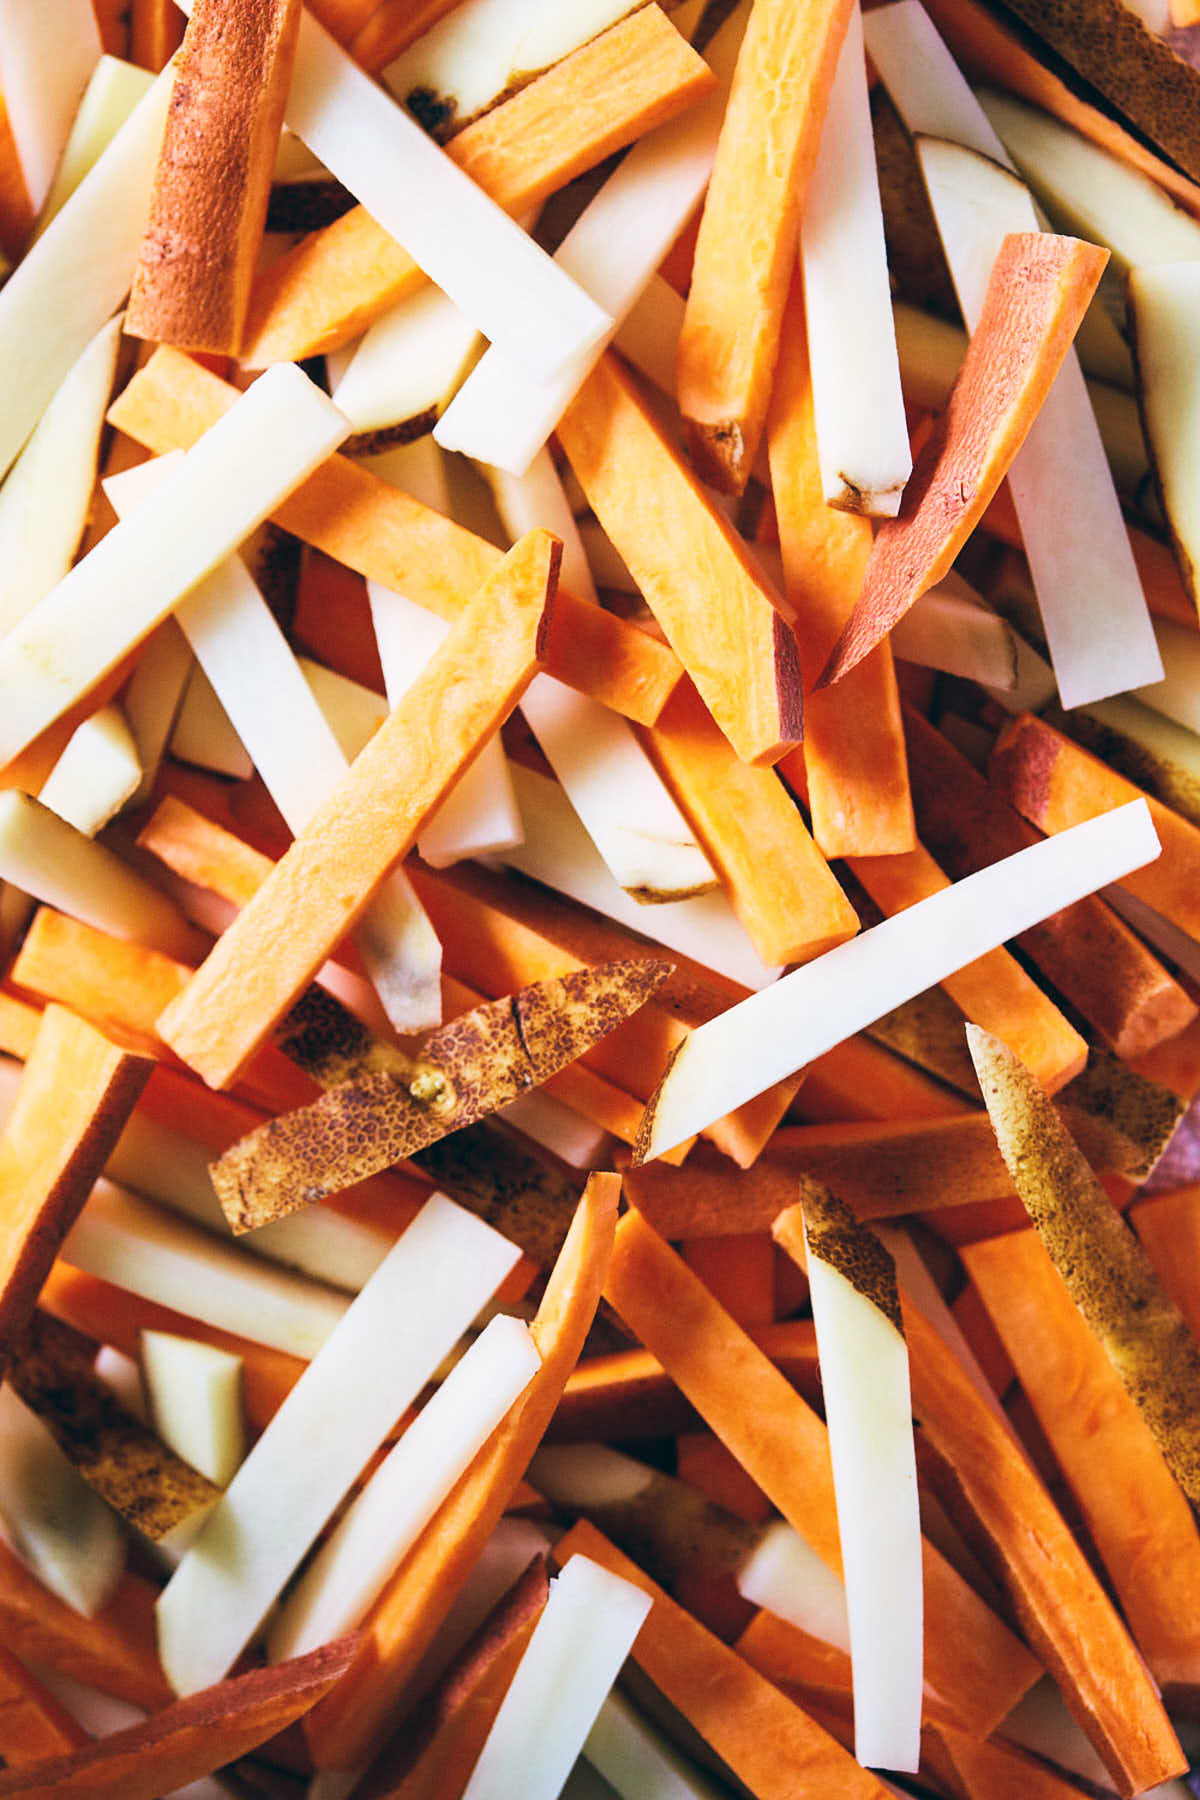 Mix of sweet and russet potatoes cut into long string for chili fries